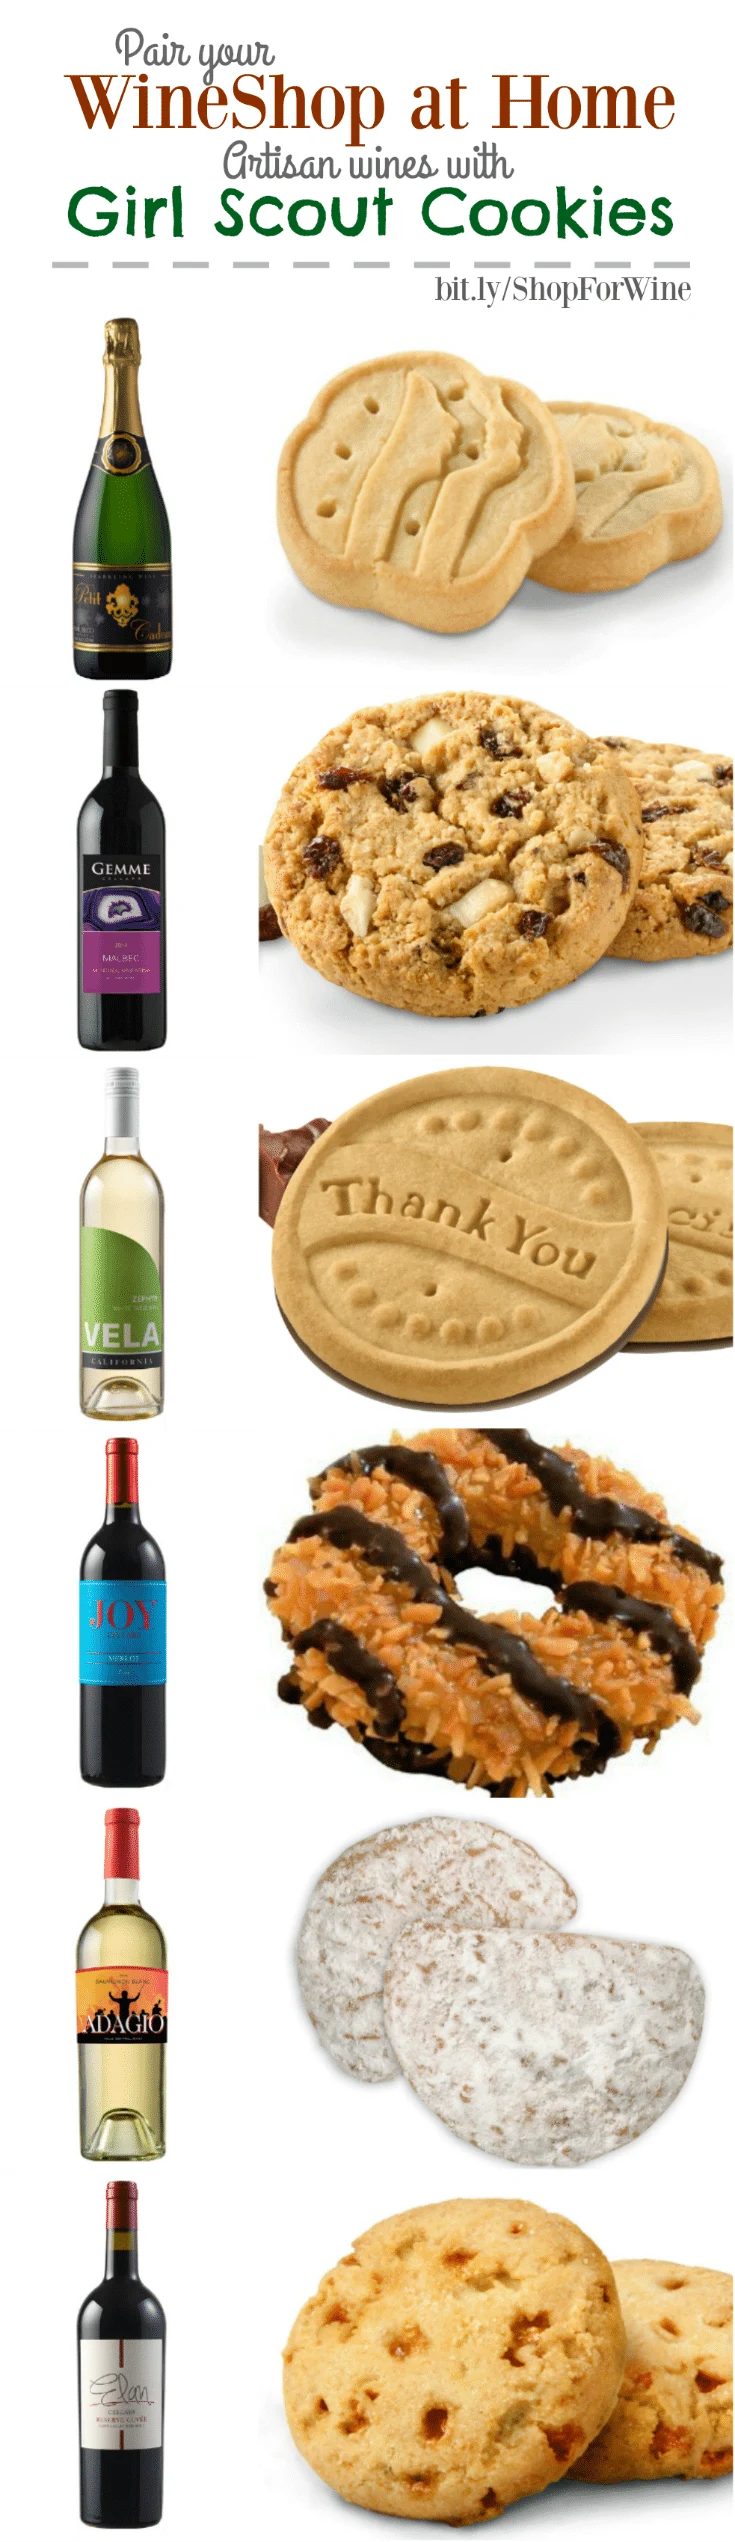 WineShop at Home Wine and Girl Scout Cookies